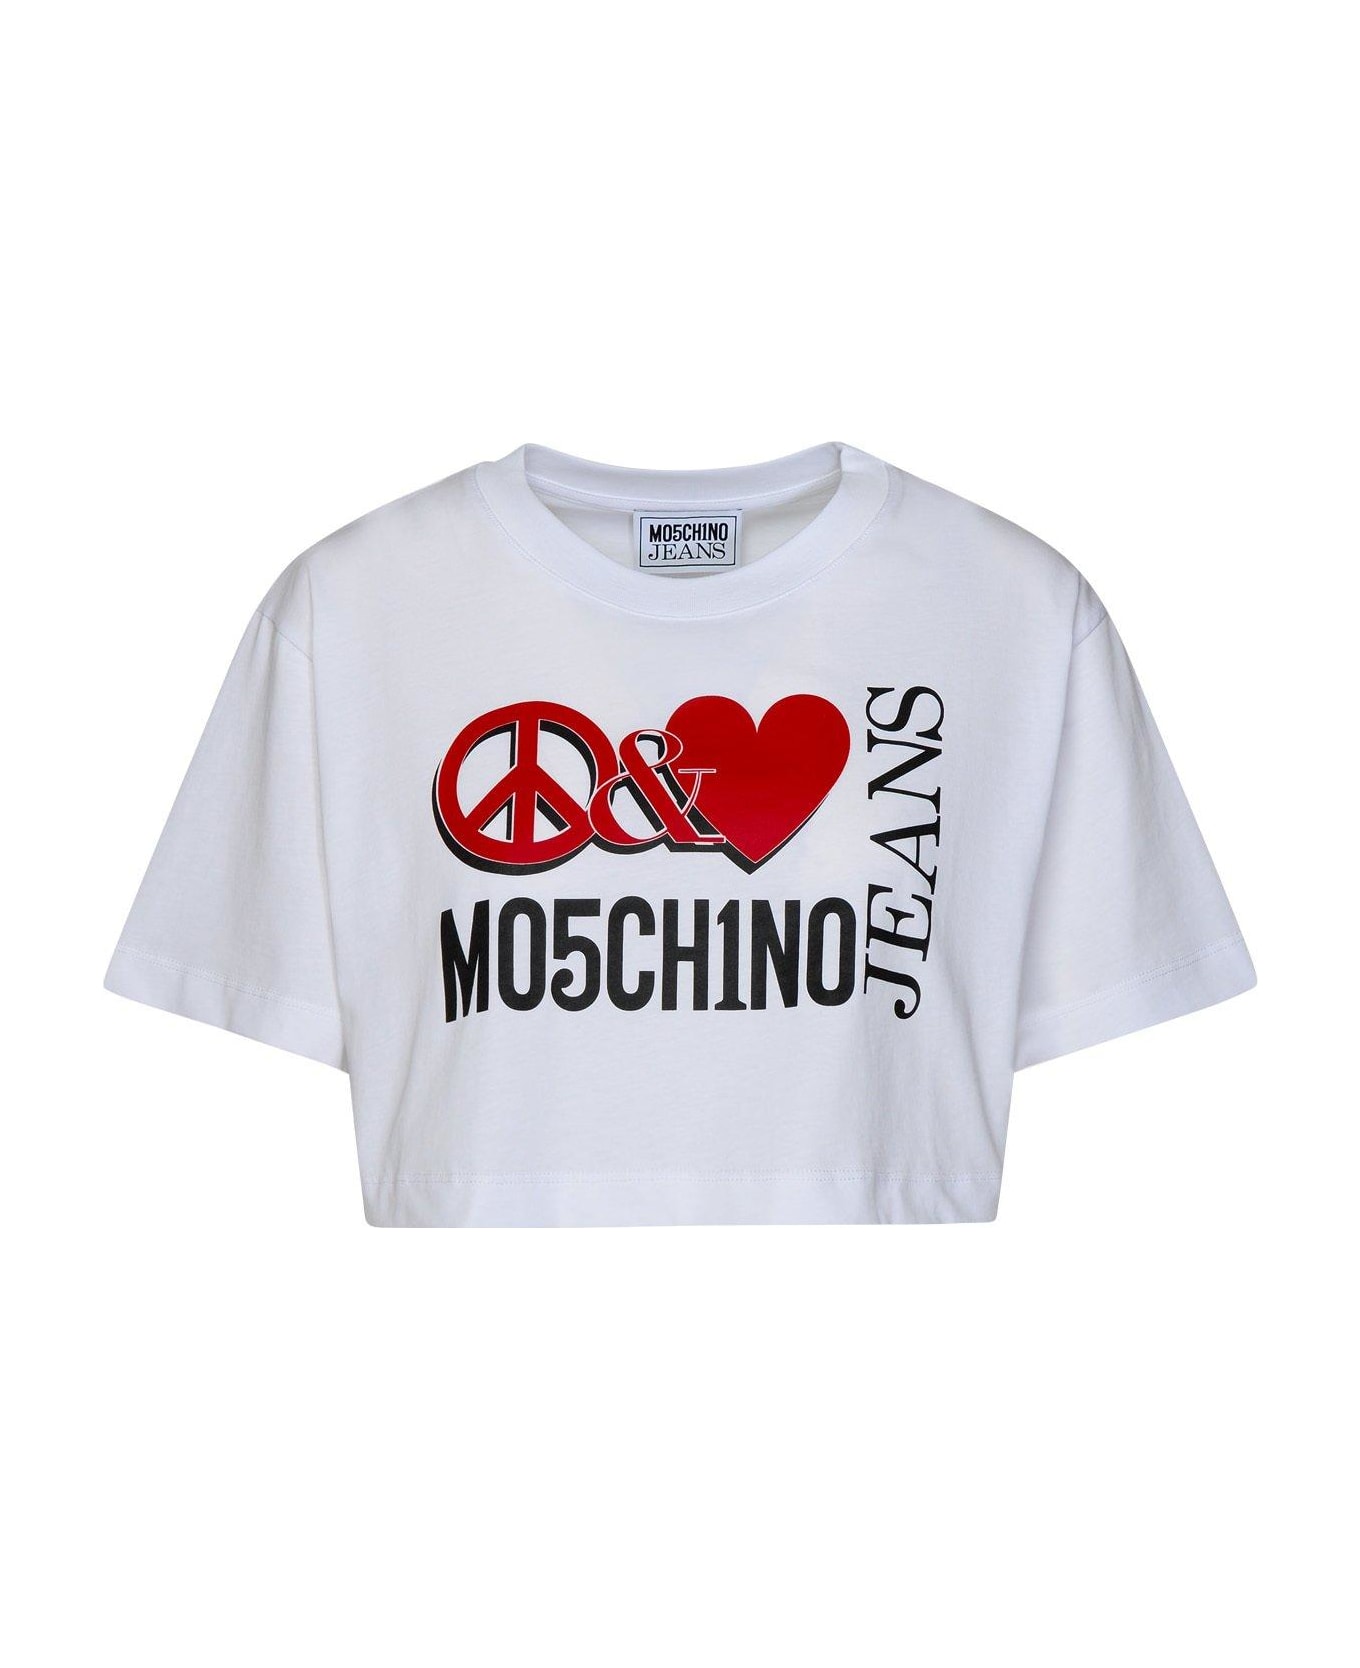 M05CH1N0 Jeans Jeans Logo Printed Cropped T-shirt - White